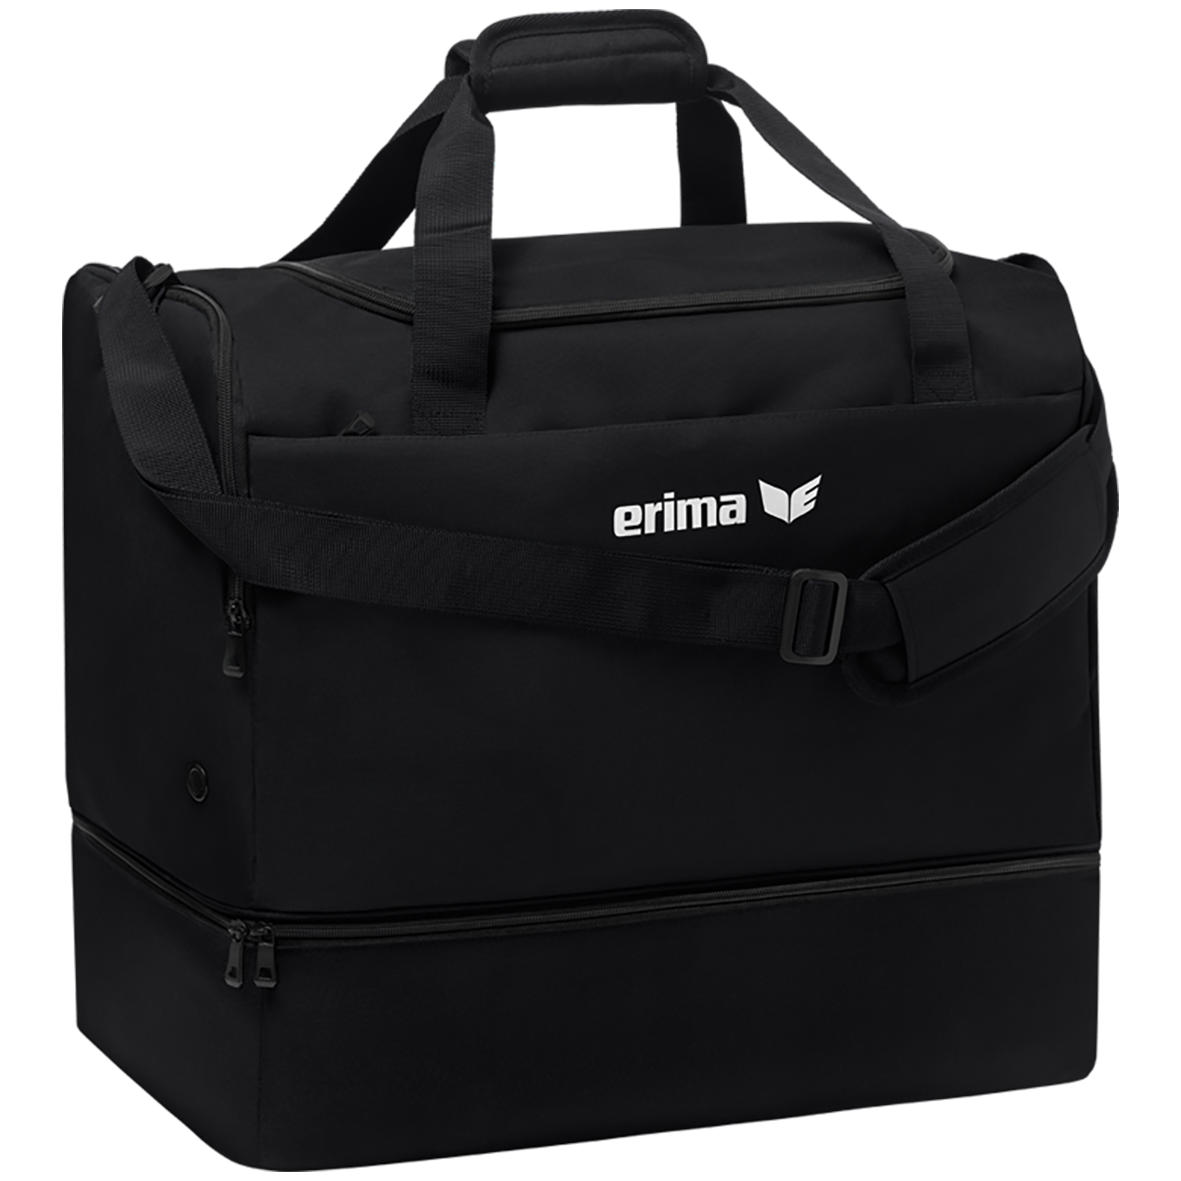 ERIMA TEAM SPORTS BAG WITH BOTTOM COMPARTMENT, BLACK.